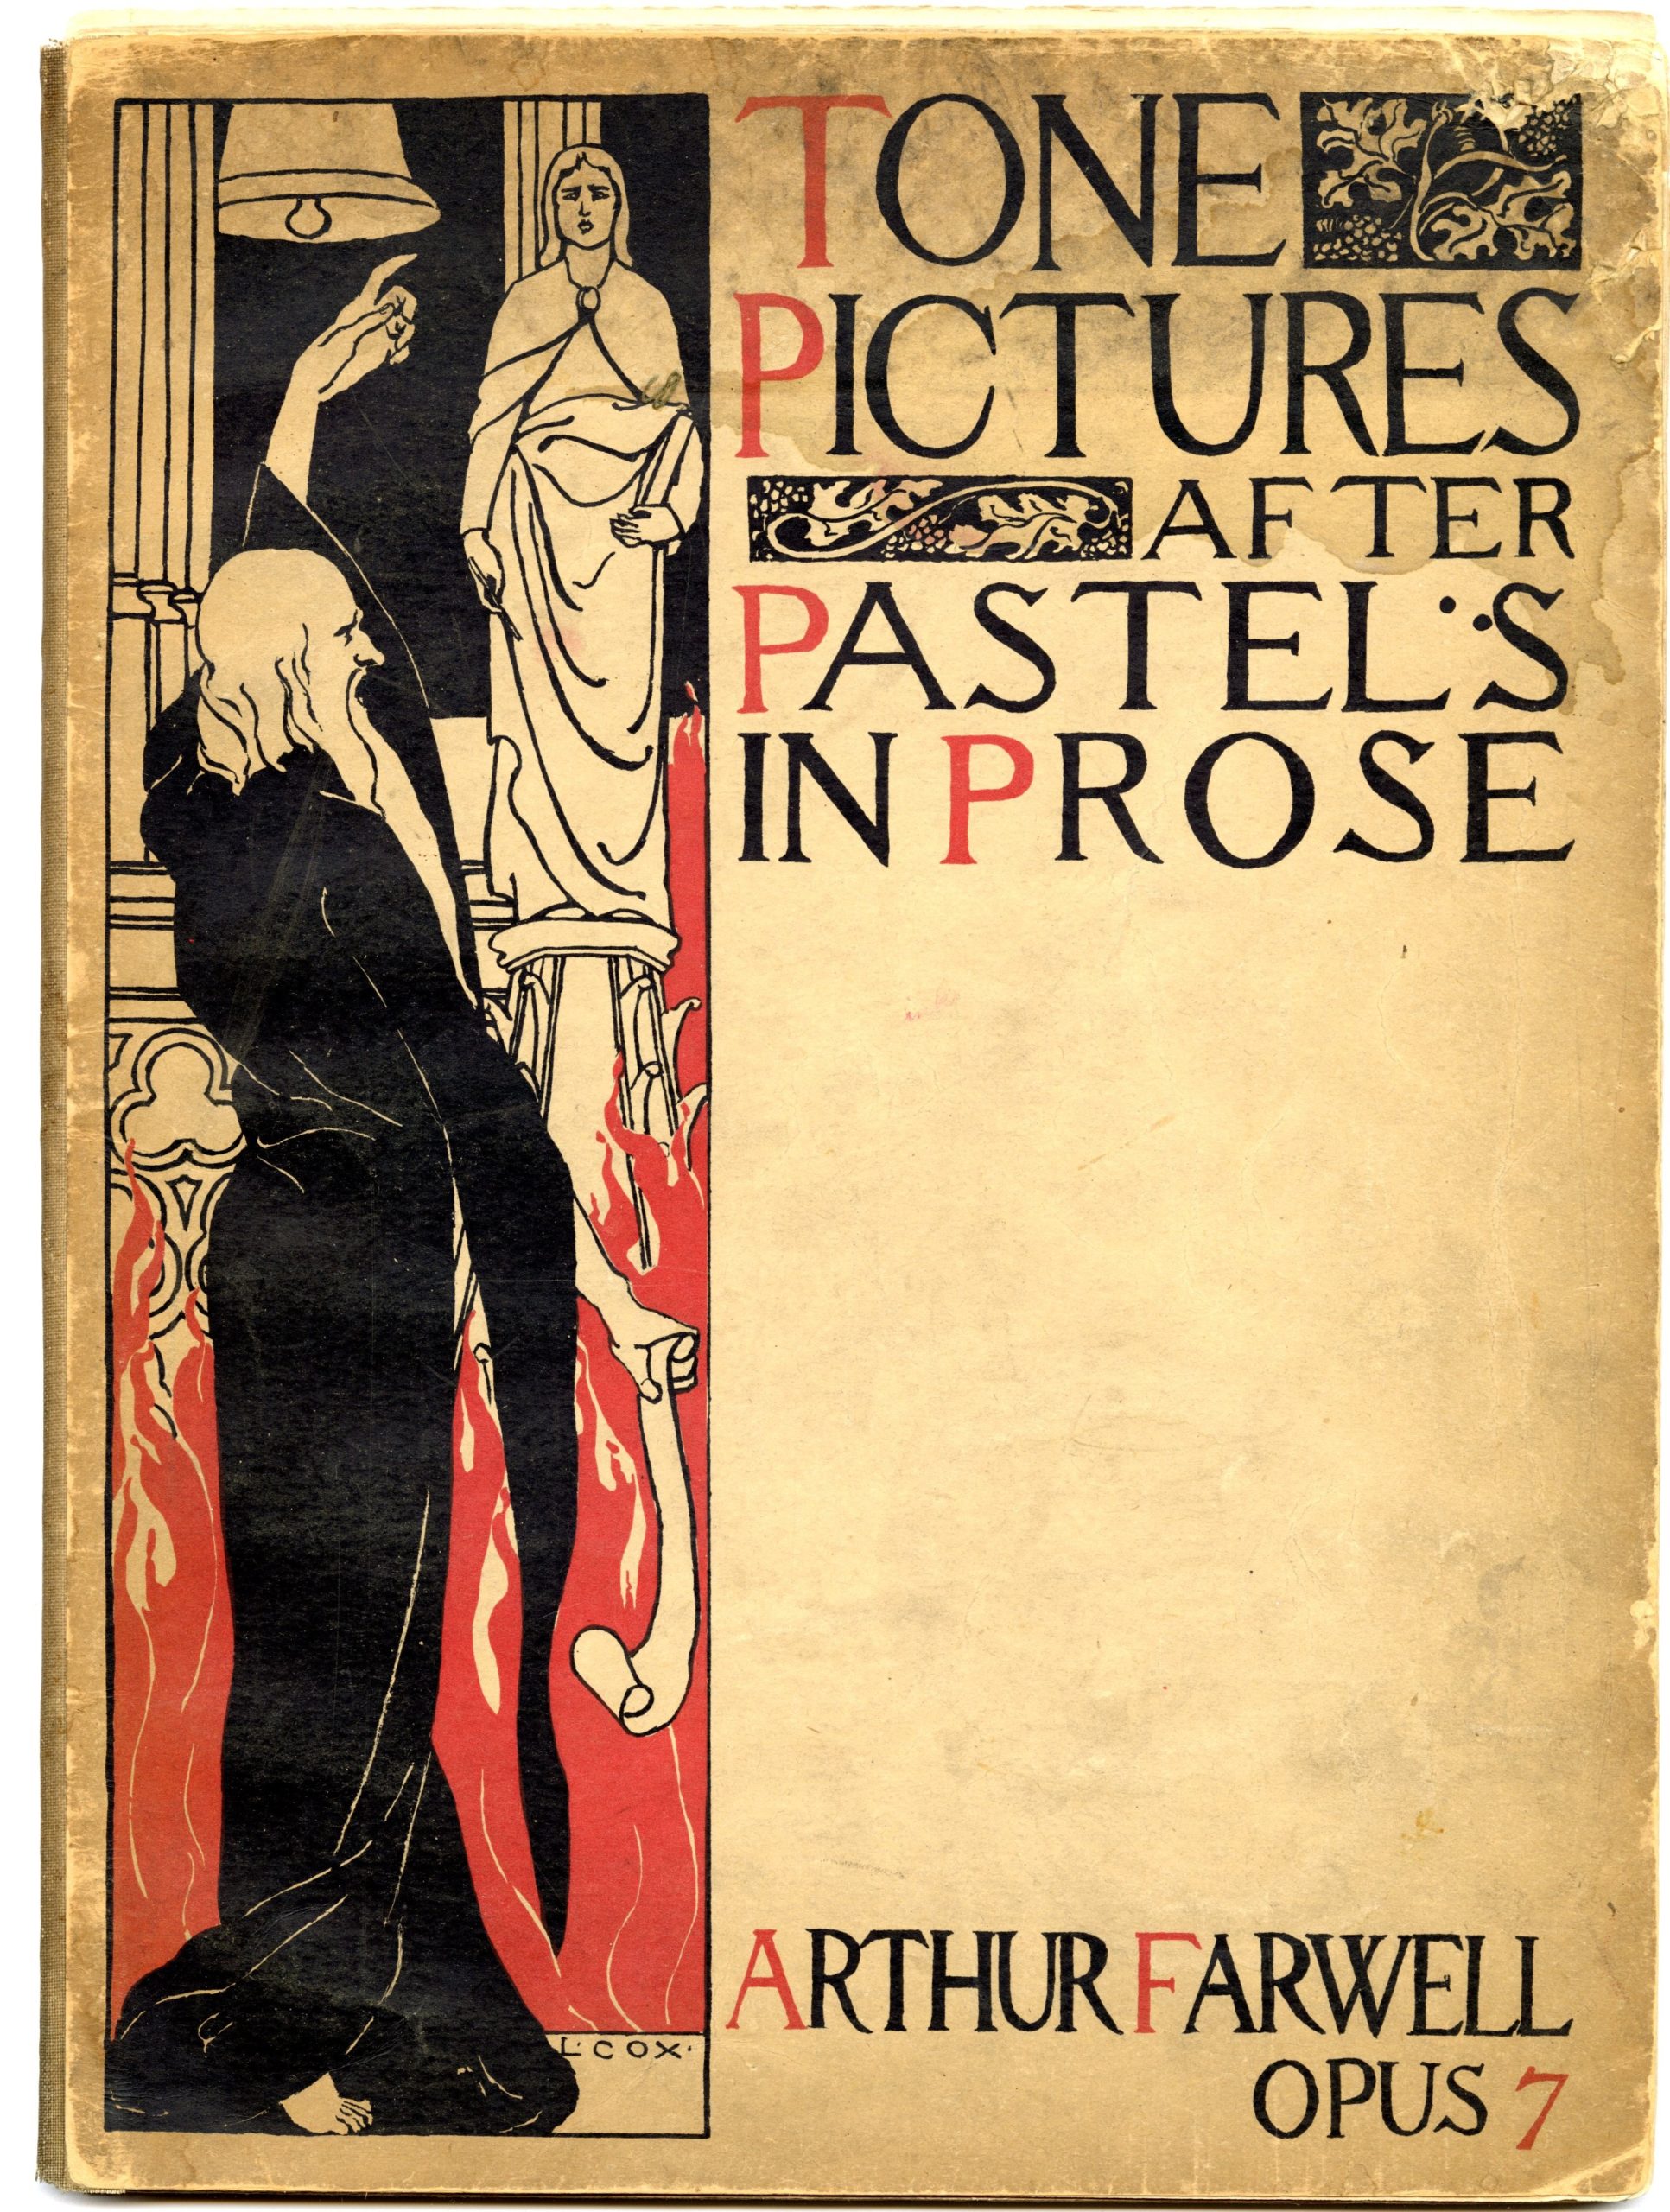 Tone Pictures After Pastels in Prose, cover of published score.